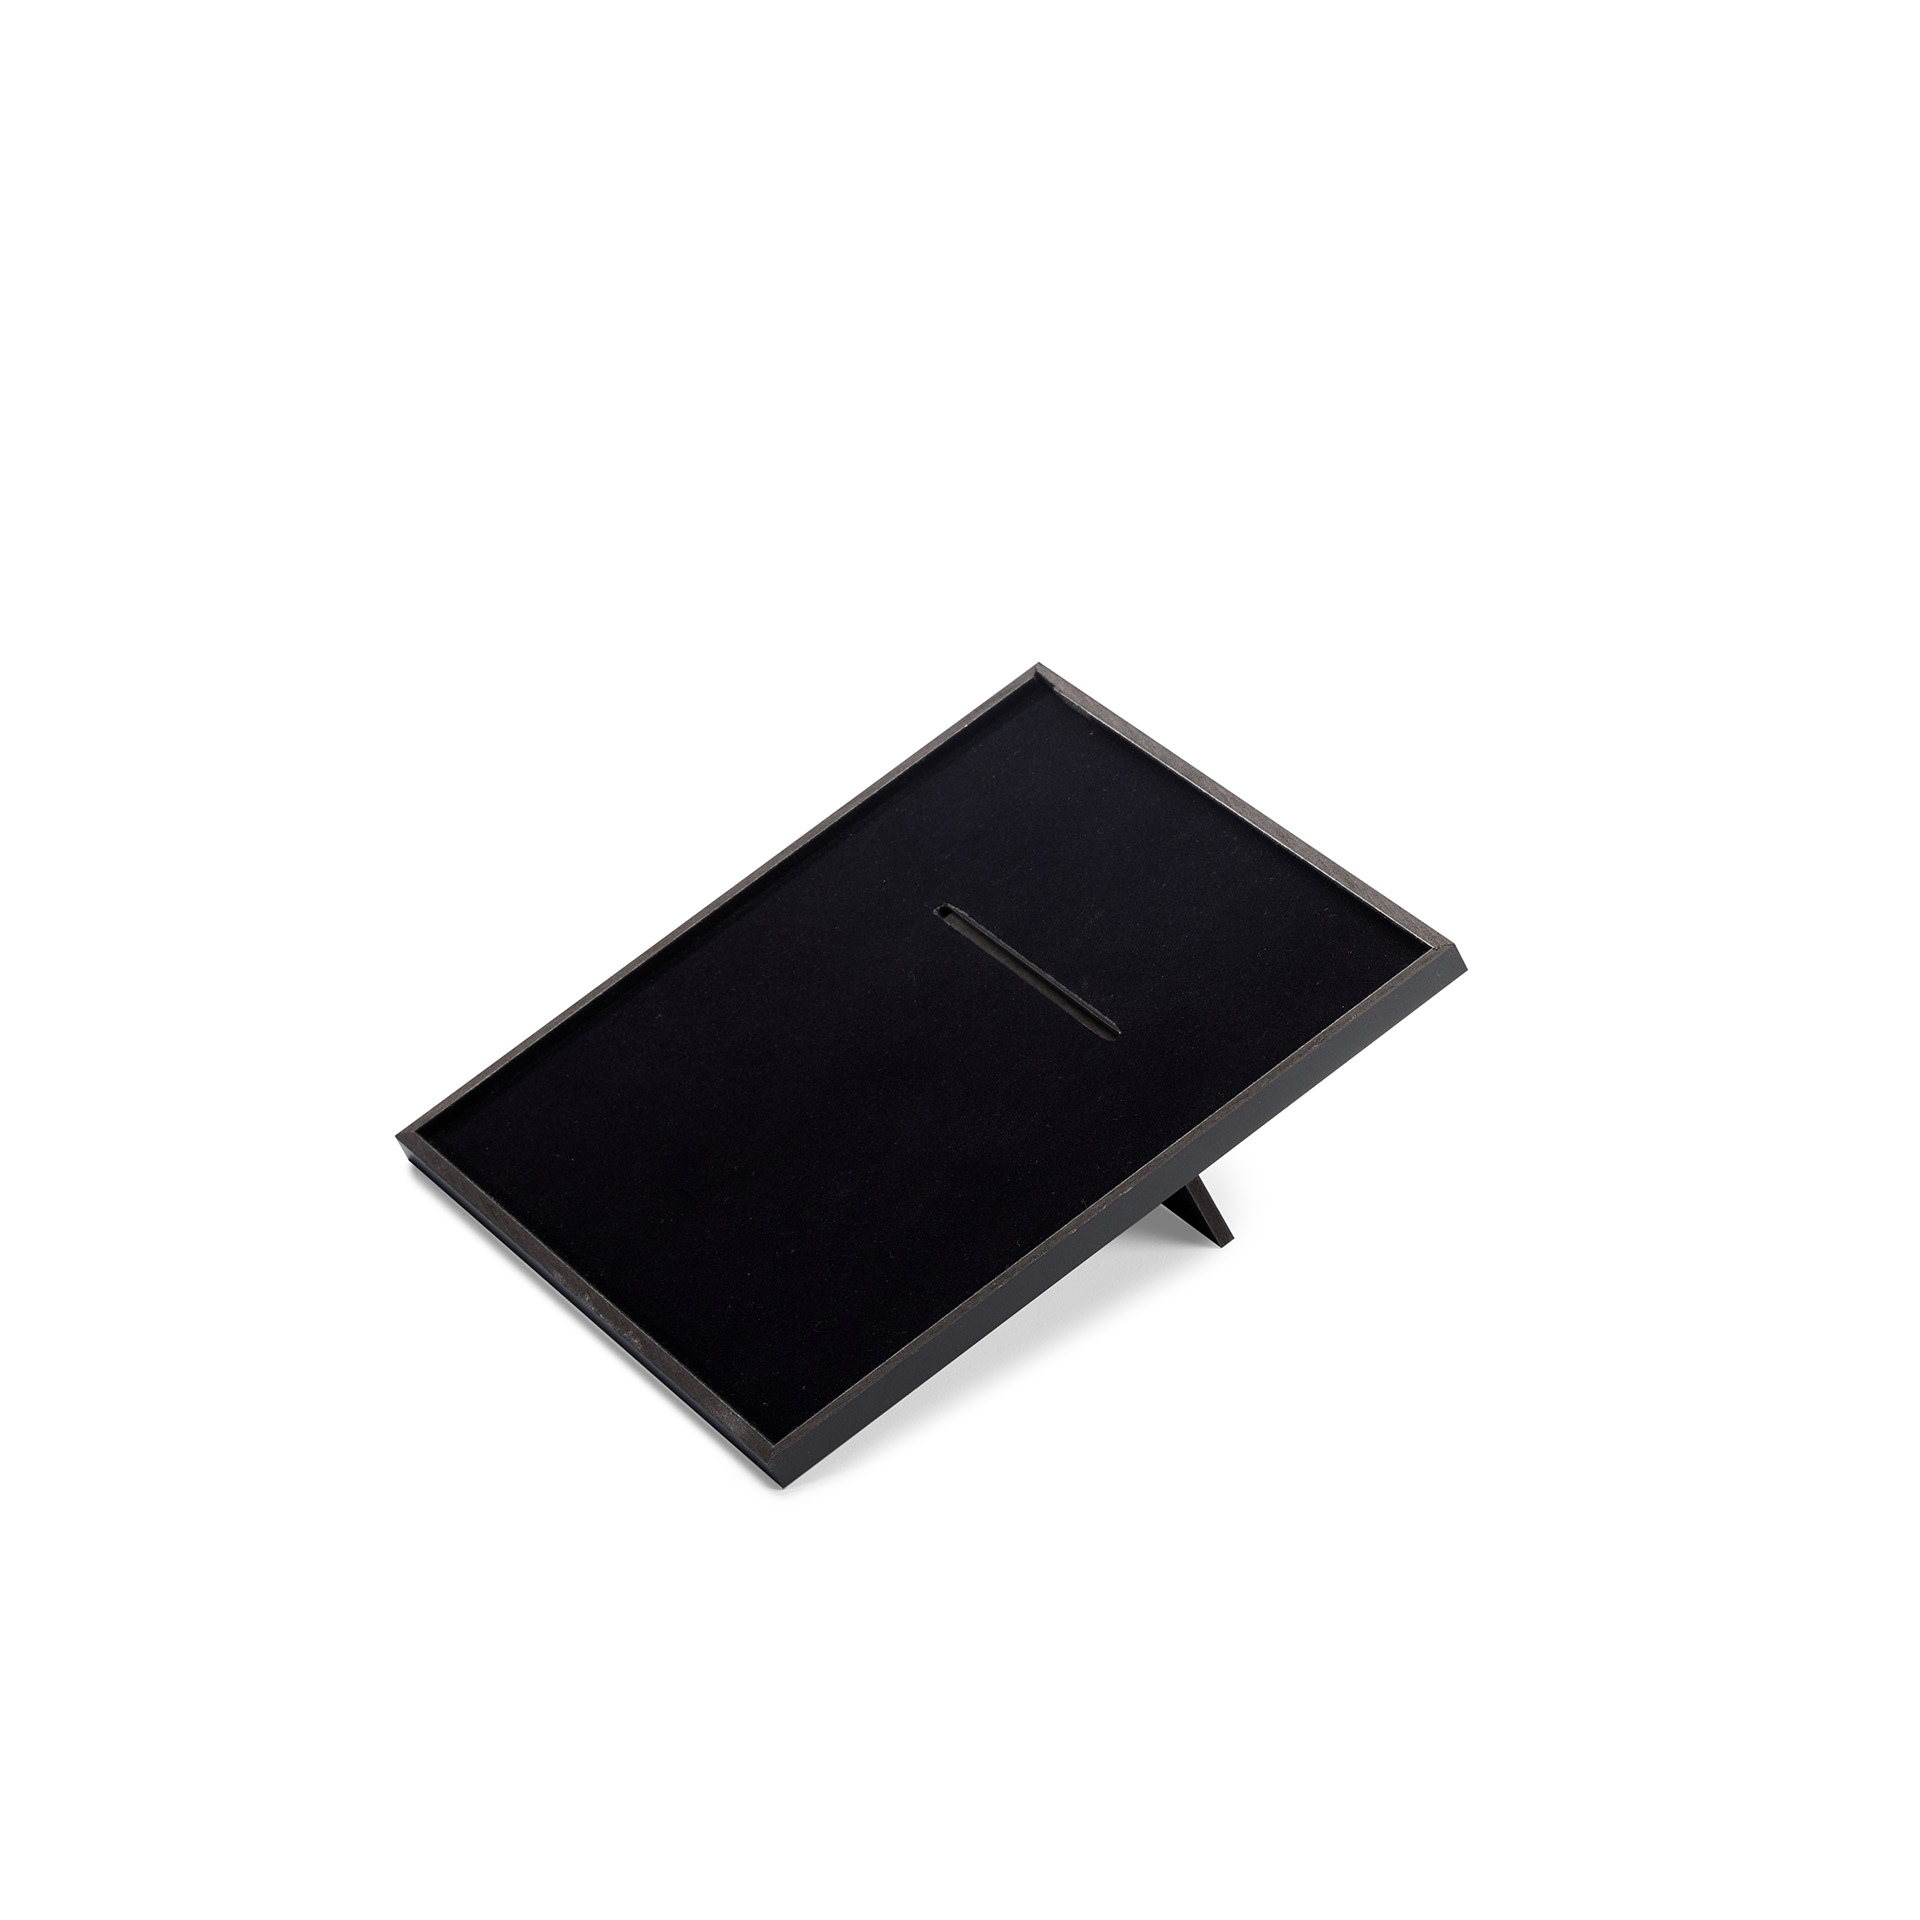 Stand for tablet small, 167 x 167 x 7 mm